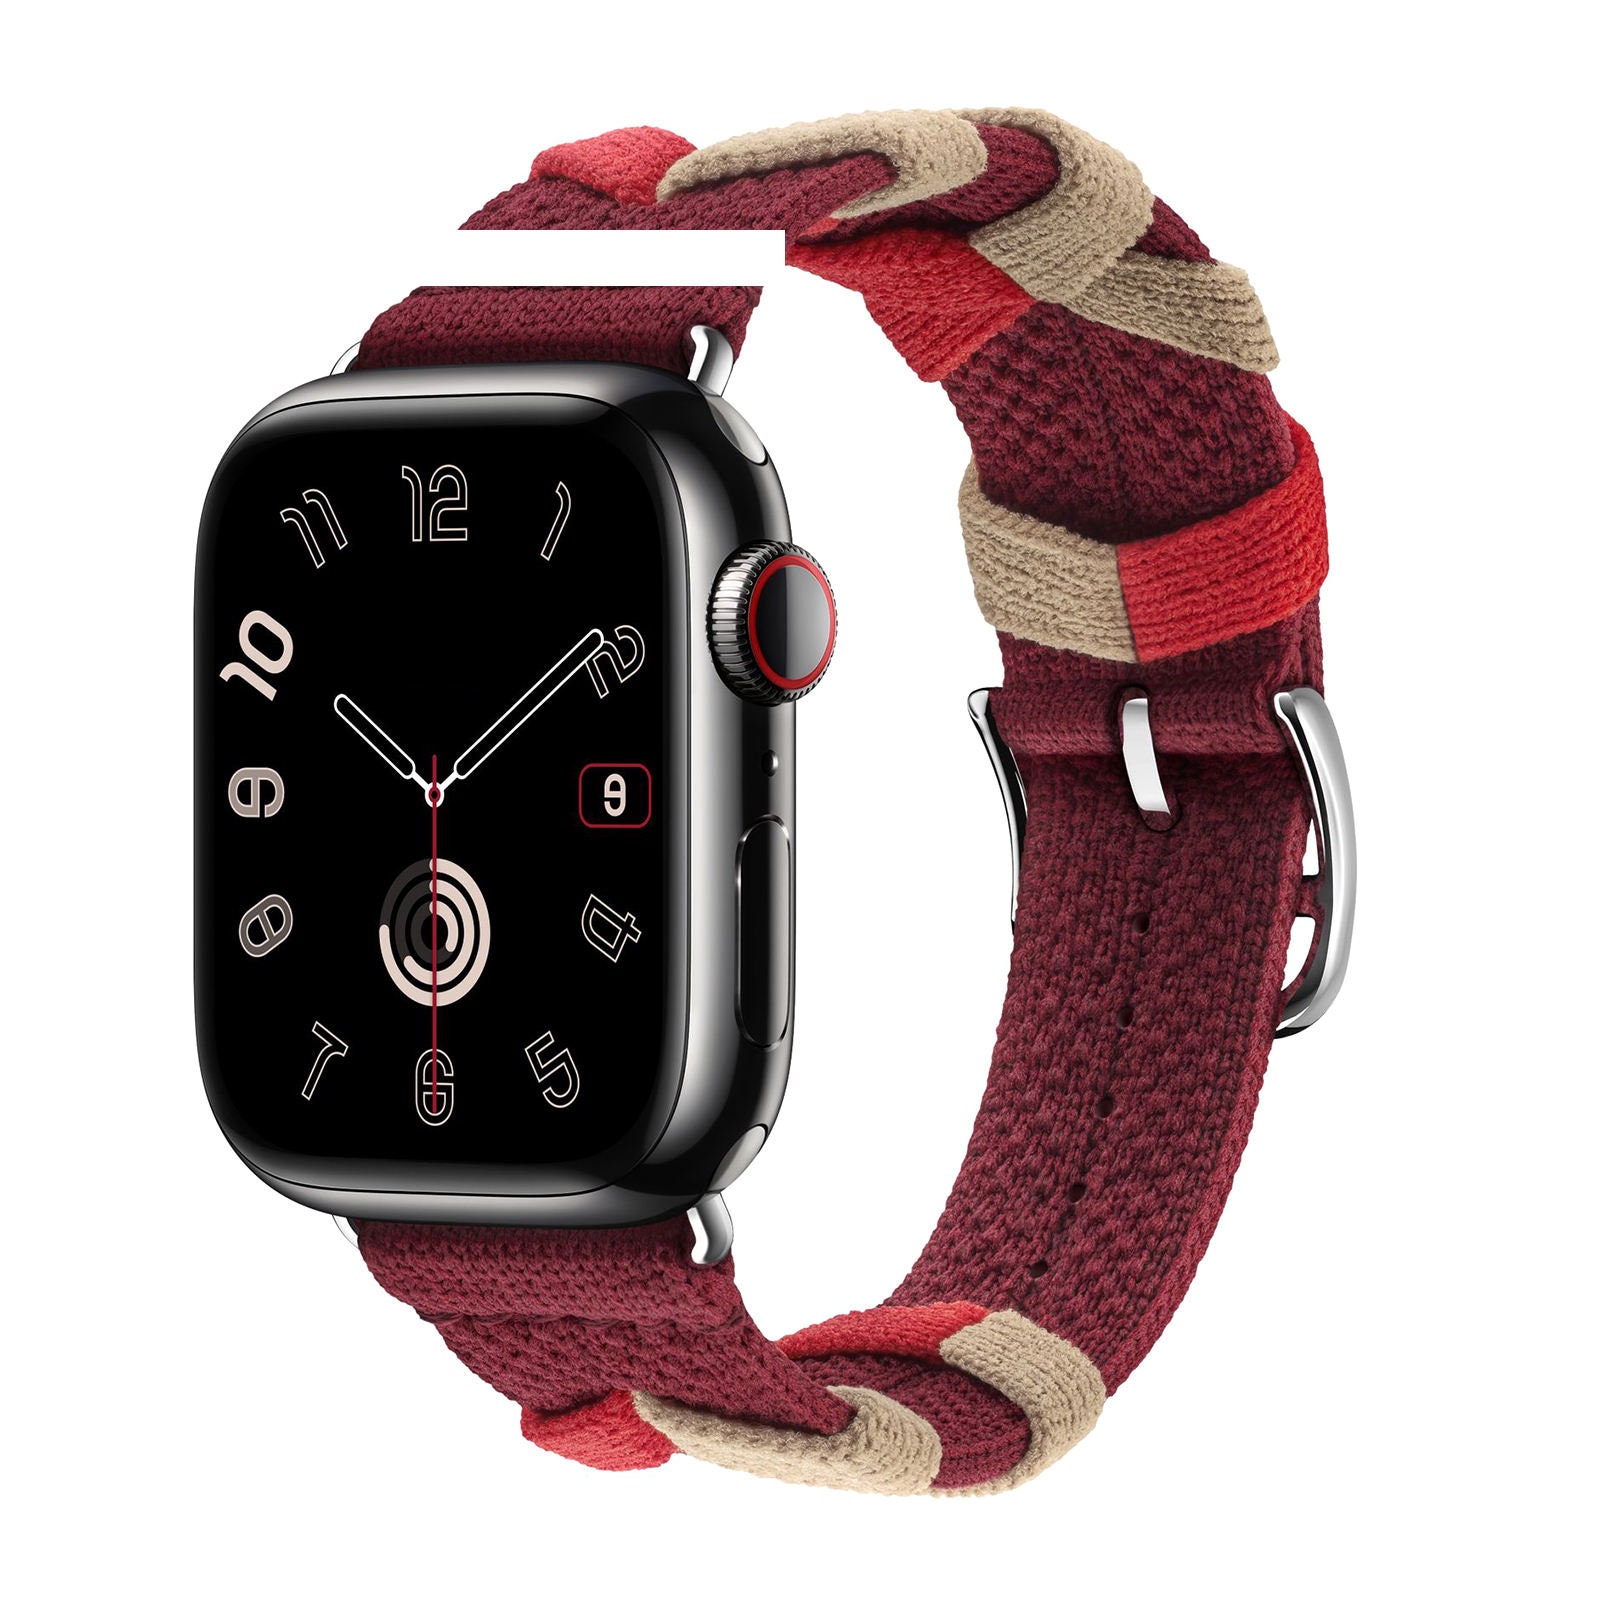 Apple Watch Series 7 Hermes Edition with a custom Louis Vuitton